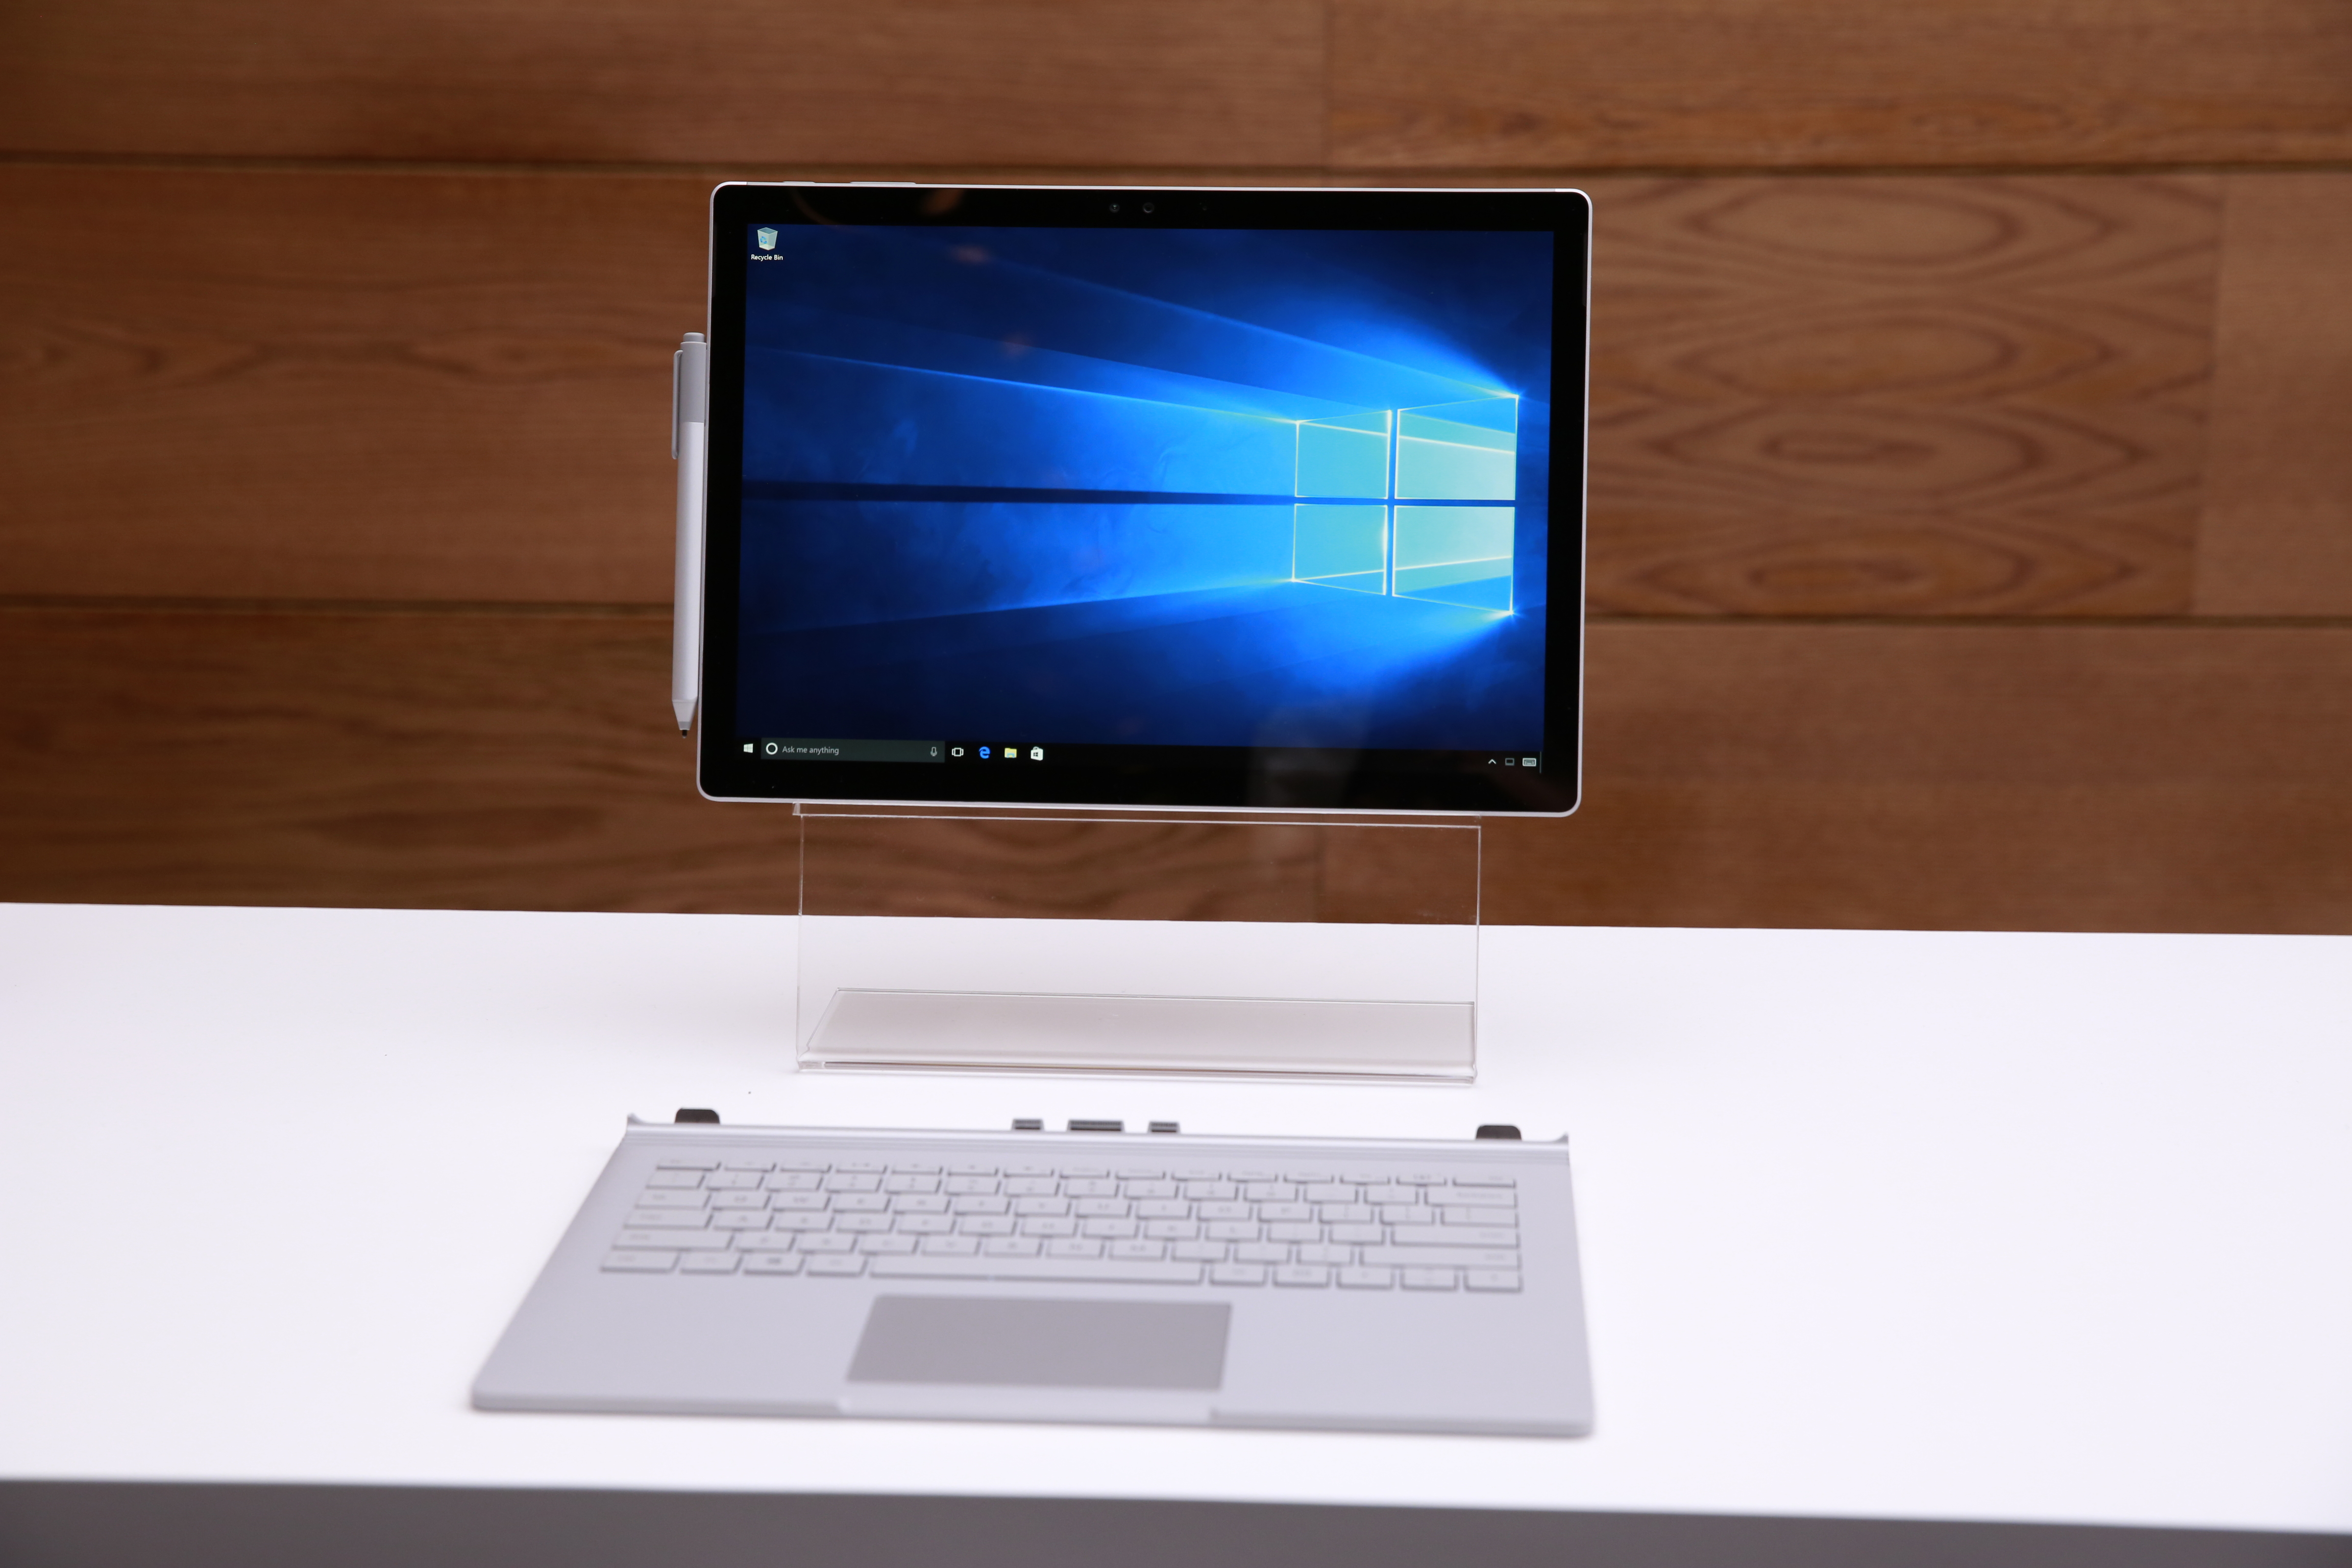 Microsoft brings forth a 2-in-1 that is both a convertible and detachable